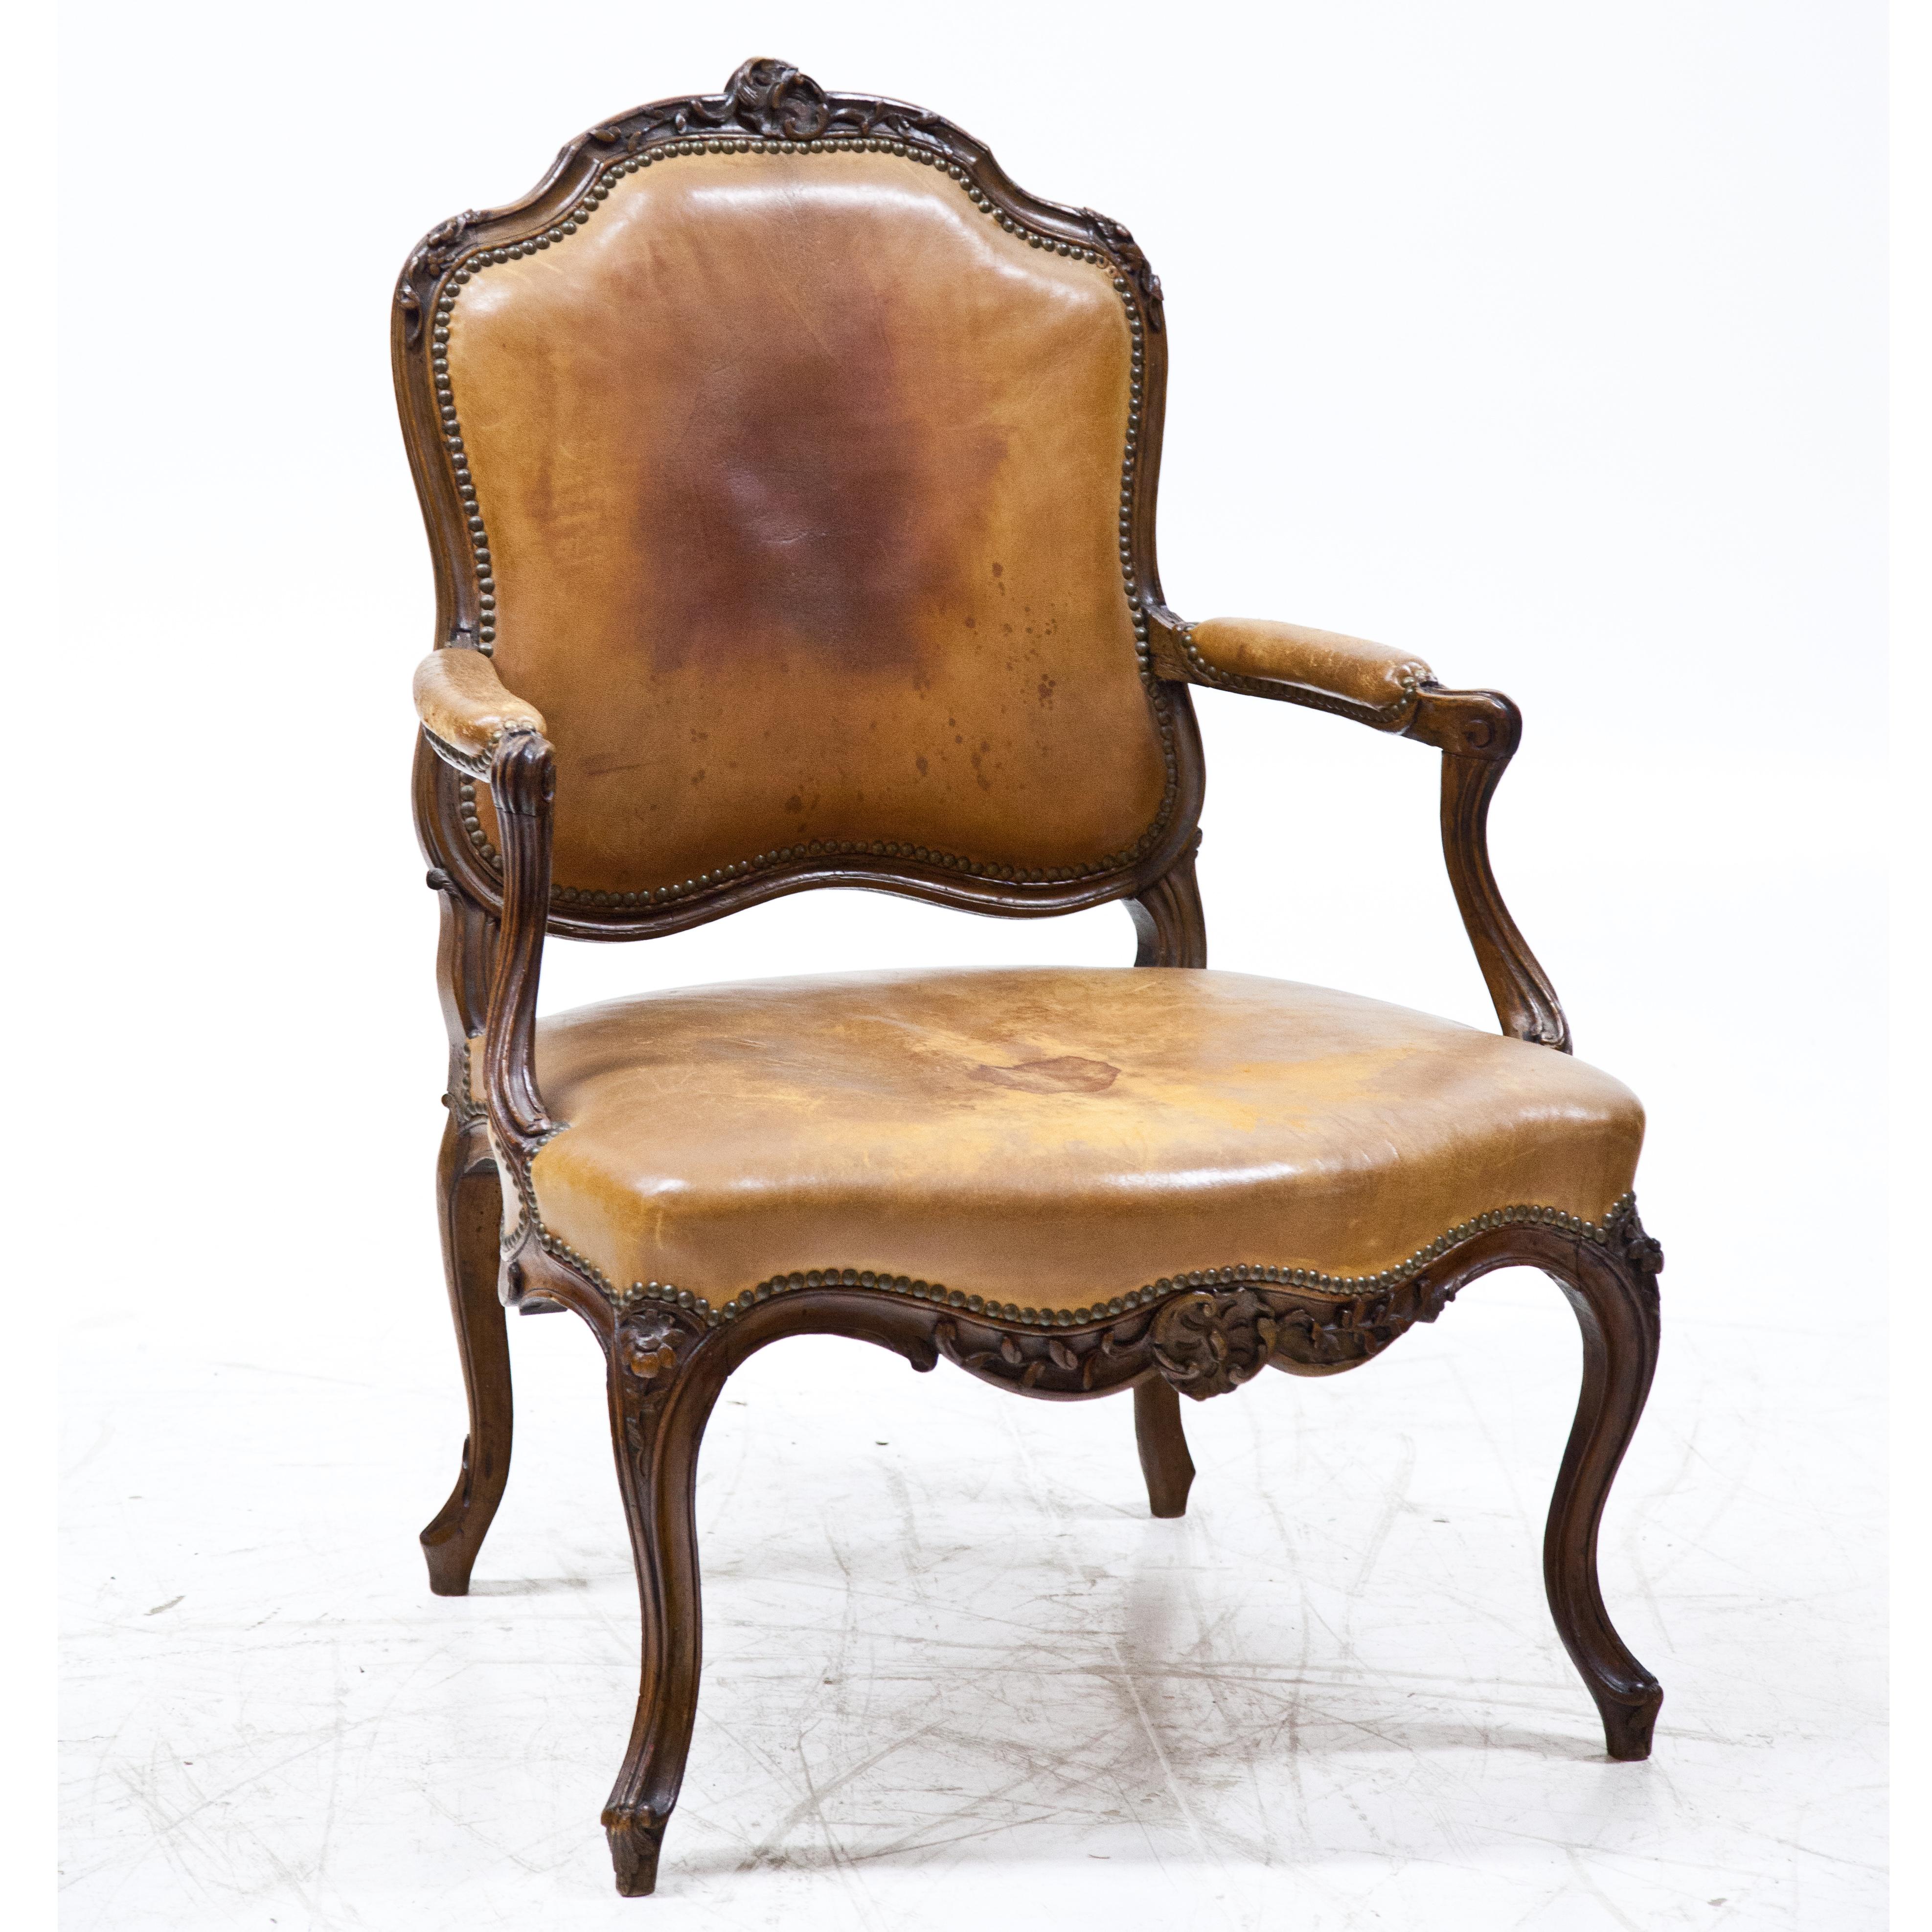 Armchair standing on S-legs with curved frame and carved floral decorations. The trapezoidal seat as well as the back and armrests are covered with riveted leather. The slightly set back armrests rest on curved, rocaille-shaped supports. The curved